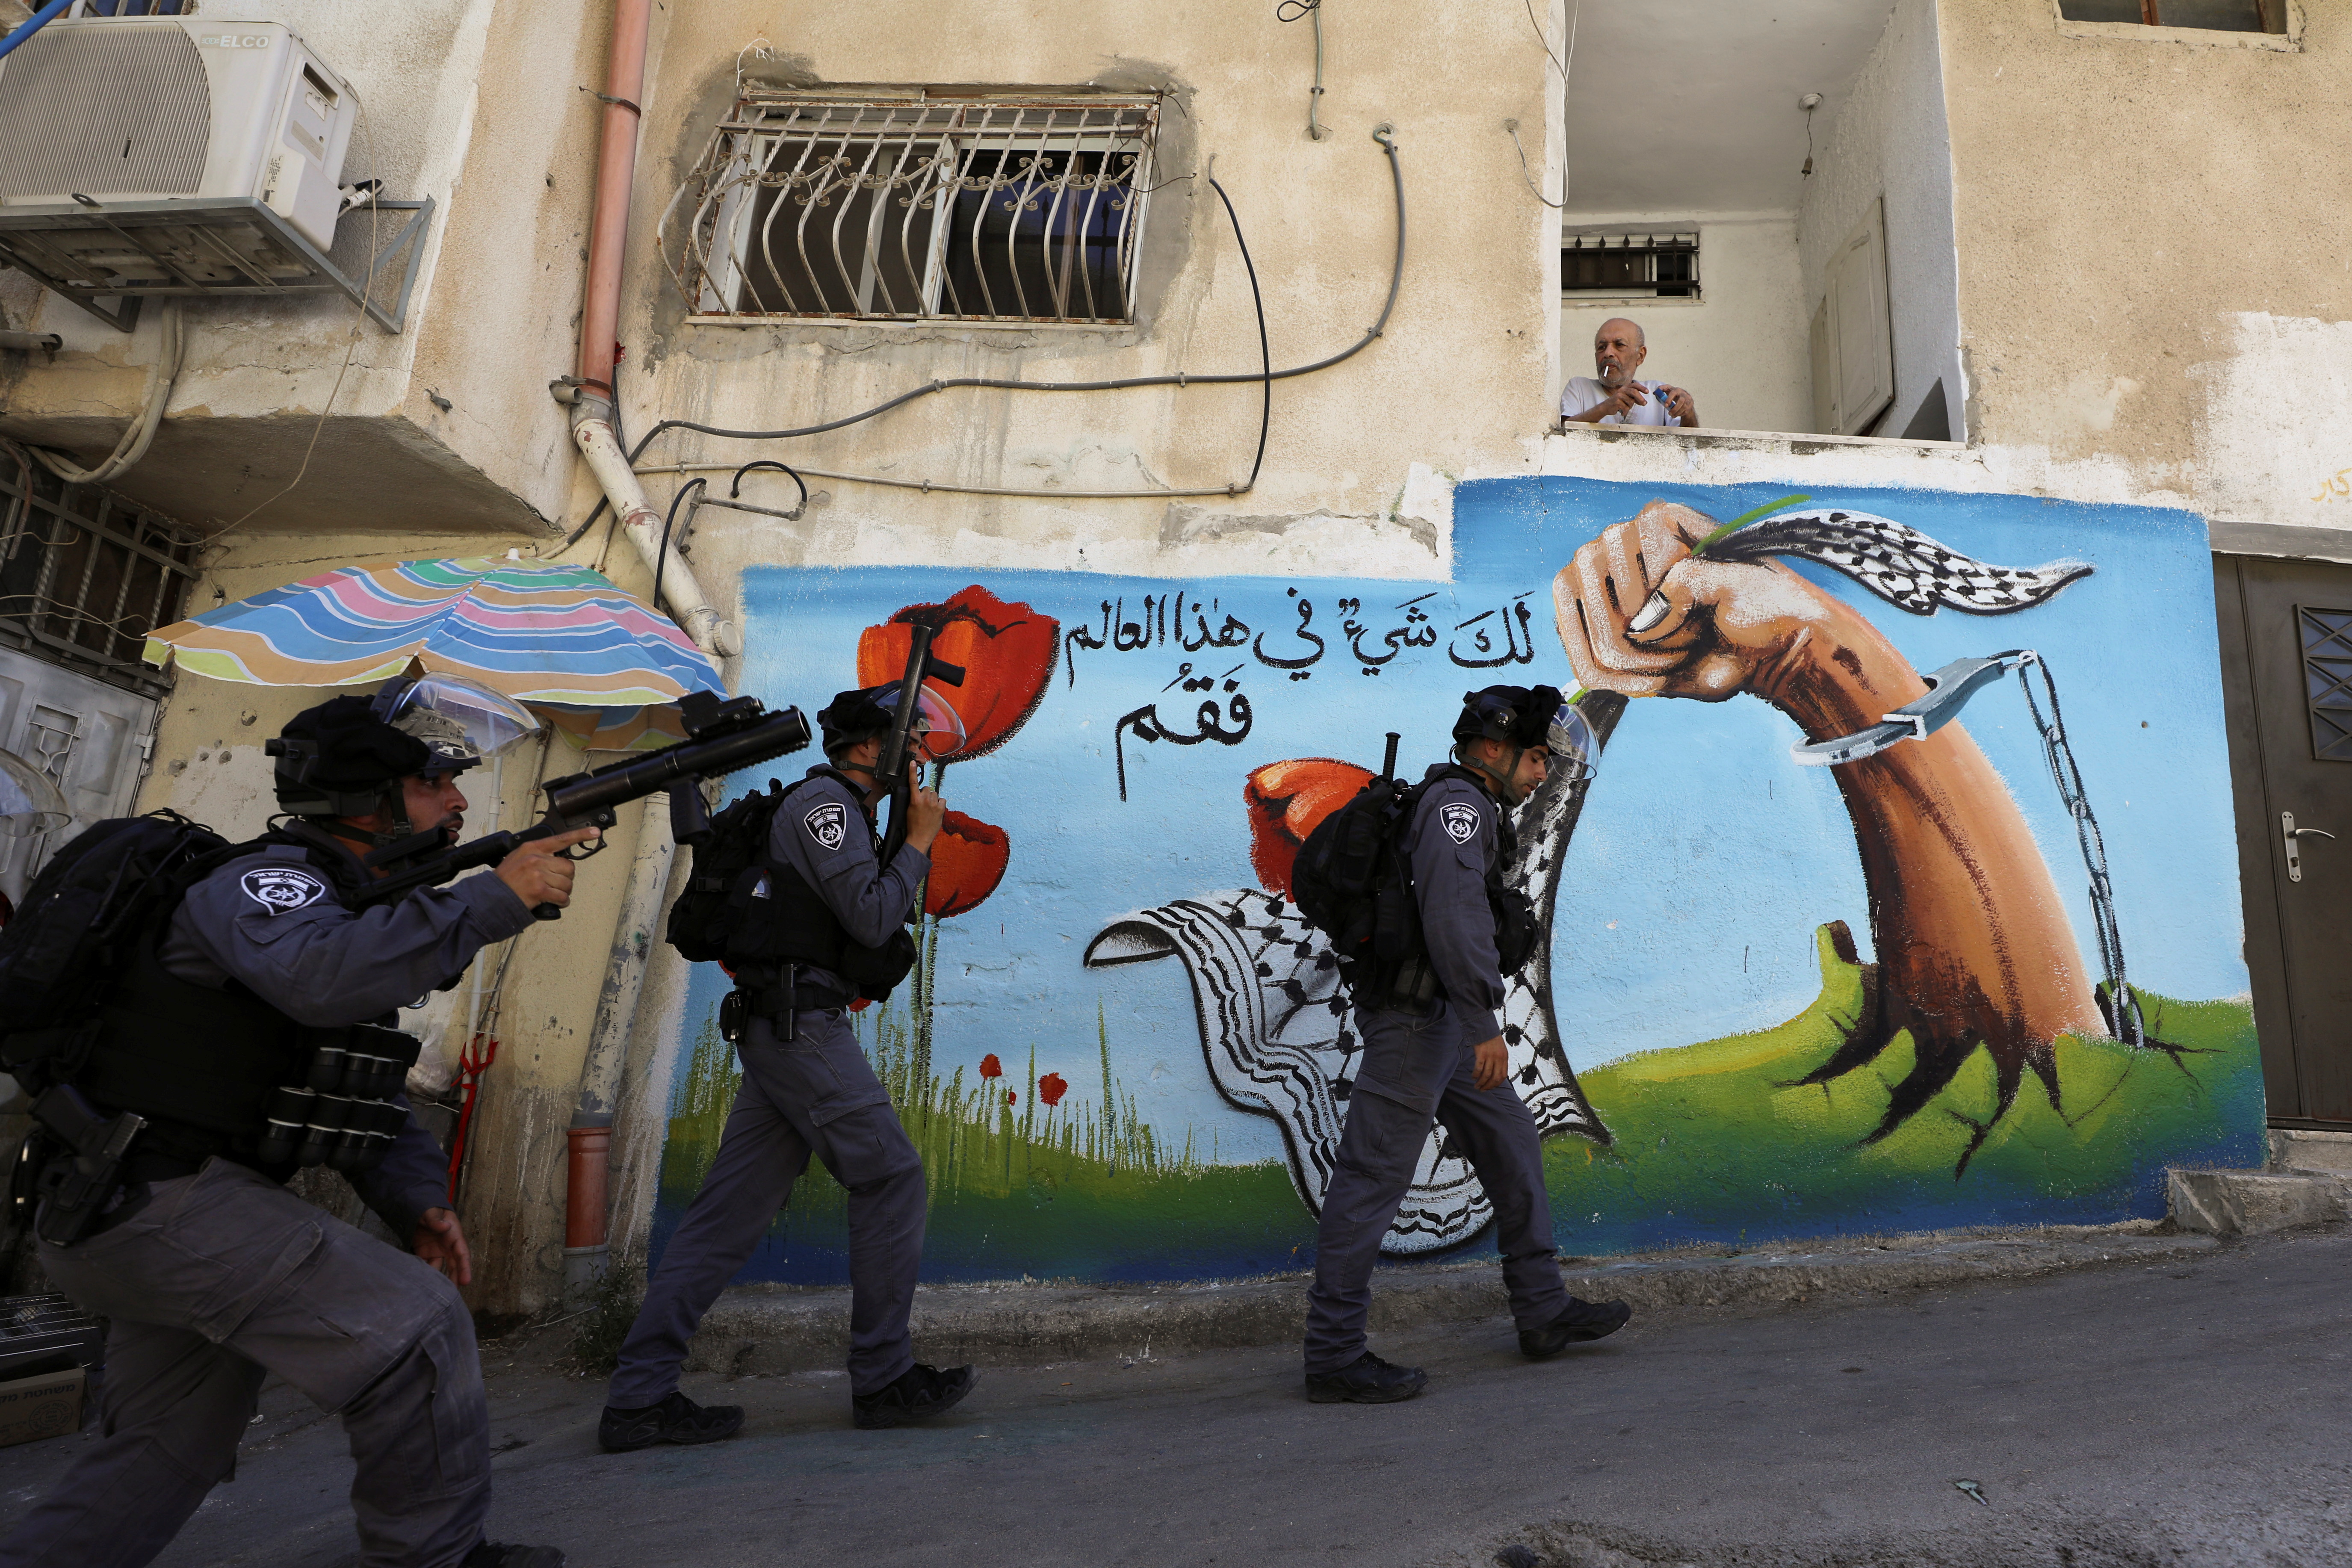 Israeli security force members walk past a house during clashes with Palestinians which erupted over Israel's demolition of a shop in the Palestinian neighbourhood of Silwan in East Jerusalem